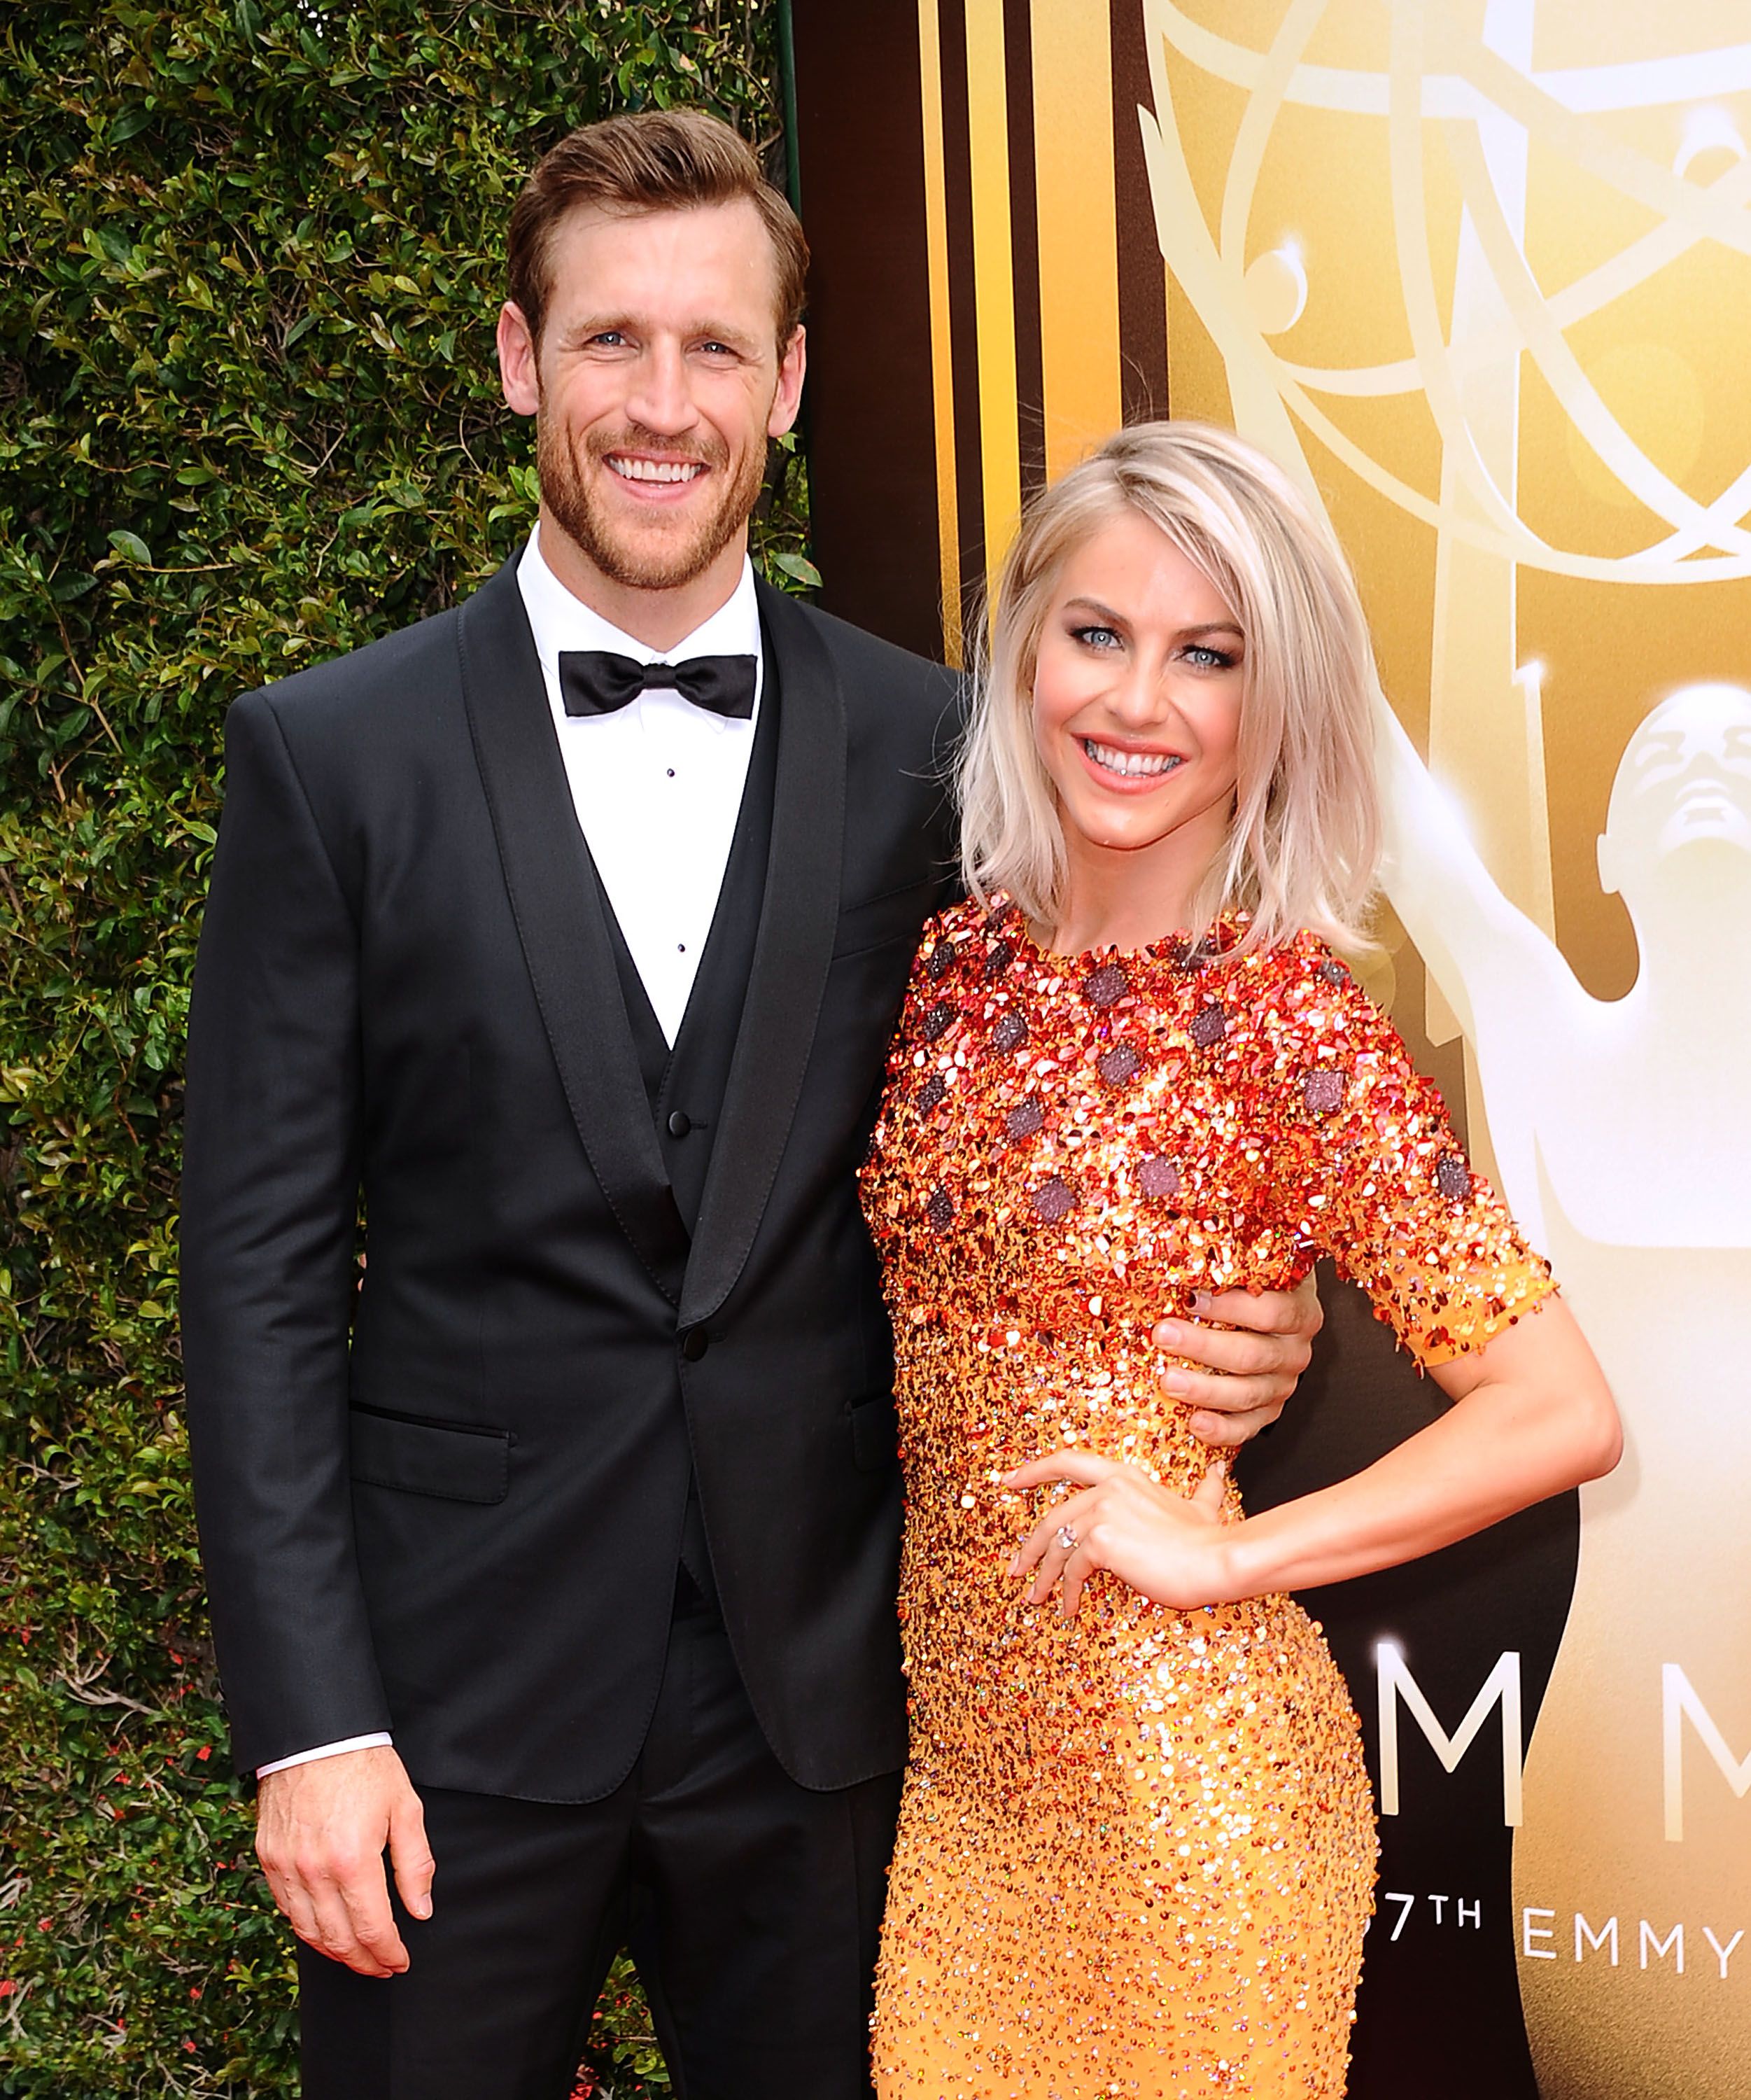 Brooks Laich and Julianne Hough at the Creative Arts Emmy Awards at Microsoft Theater on September 12, 2015, in Los Angeles, California | Photo: Jason LaVeris/FilmMagic/Getty Images